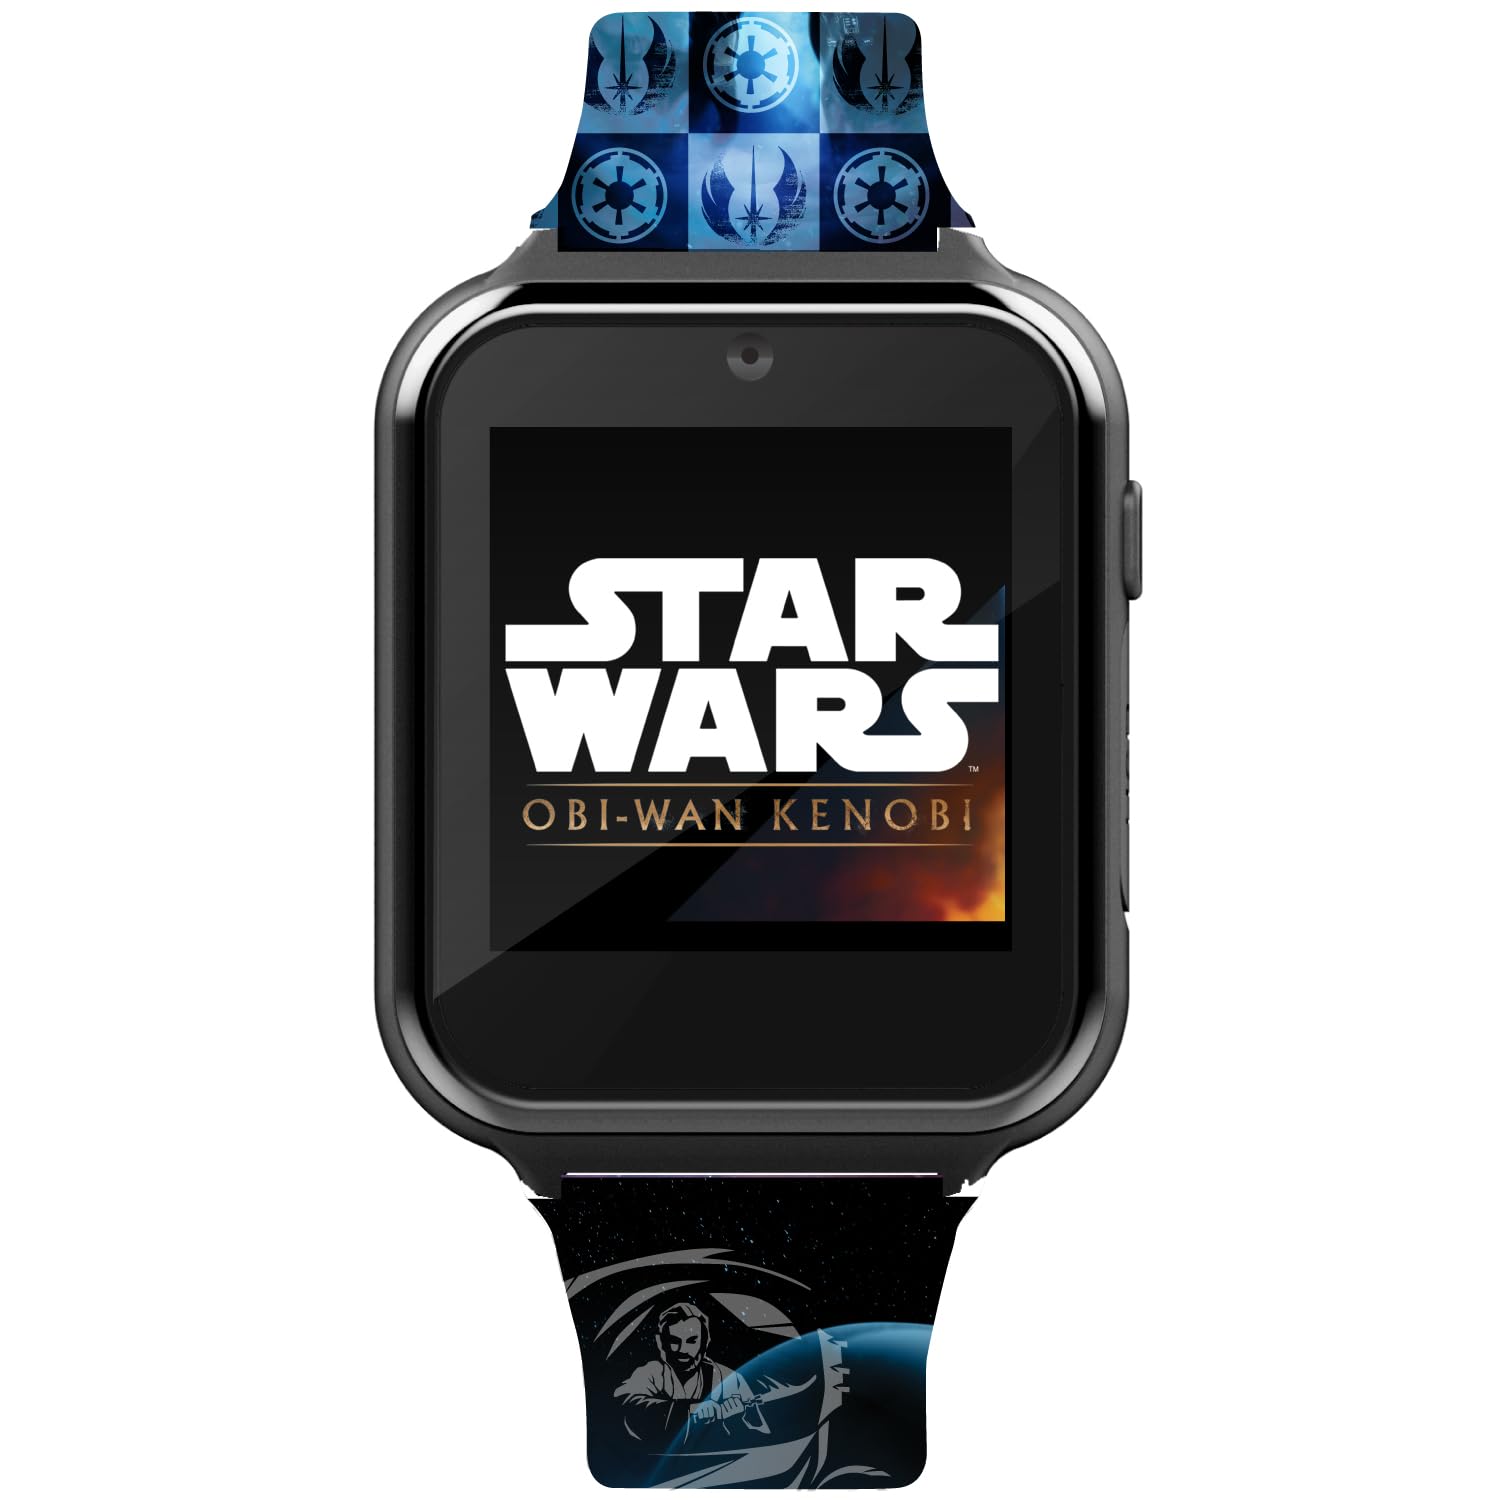 Accutime Kids Star Wars Blue Educational Learning Touchscreen Smart Watch Toy for Boys, Girls - Selfie Cam, Alarm, Calculator & More (Model: STW4069AZ)